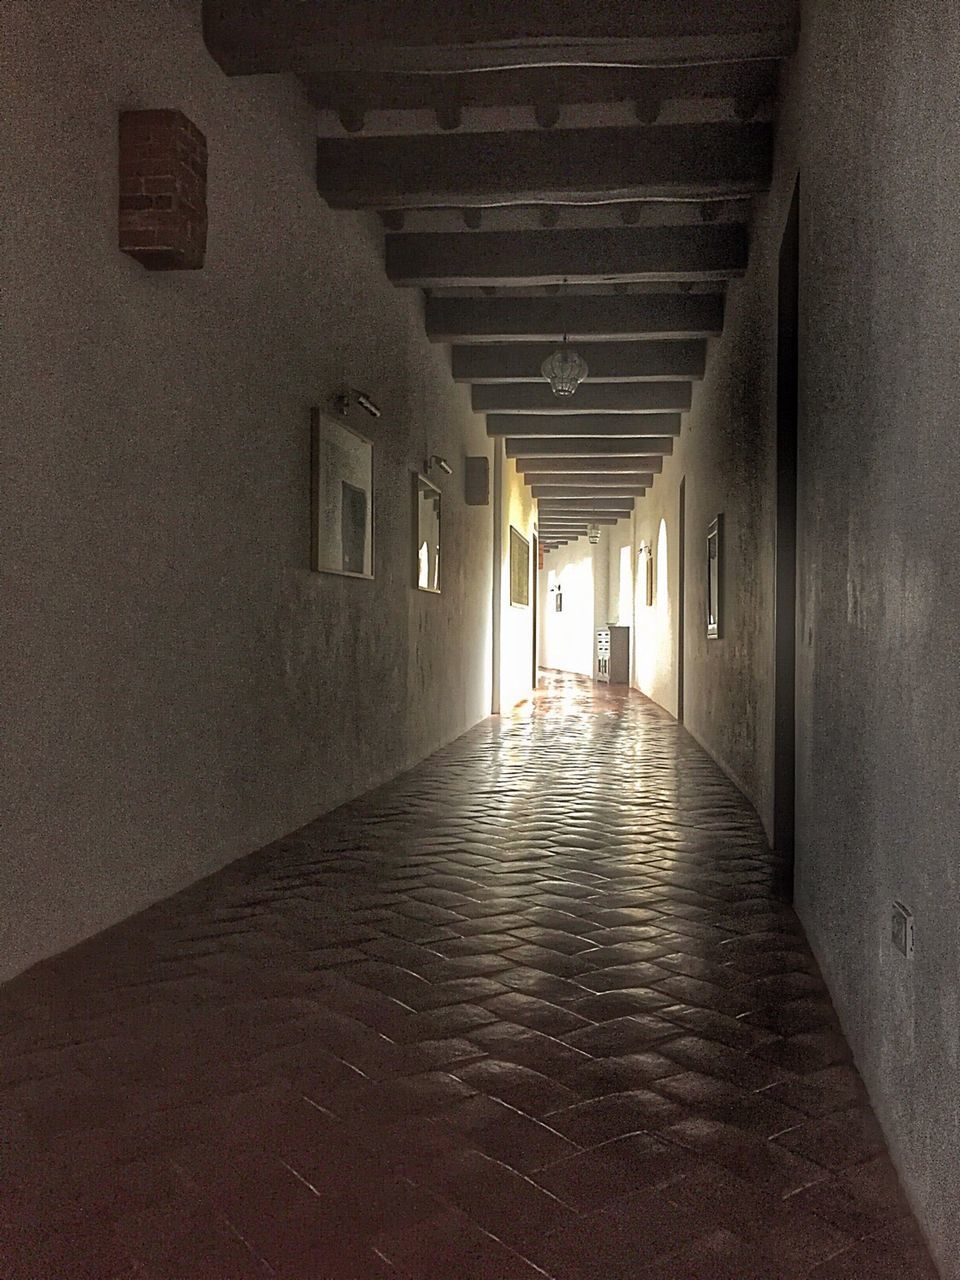 architecture, the way forward, built structure, corridor, diminishing perspective, indoors, empty, narrow, vanishing point, in a row, building exterior, building, long, illuminated, ceiling, alley, absence, lighting equipment, wall - building feature, walkway